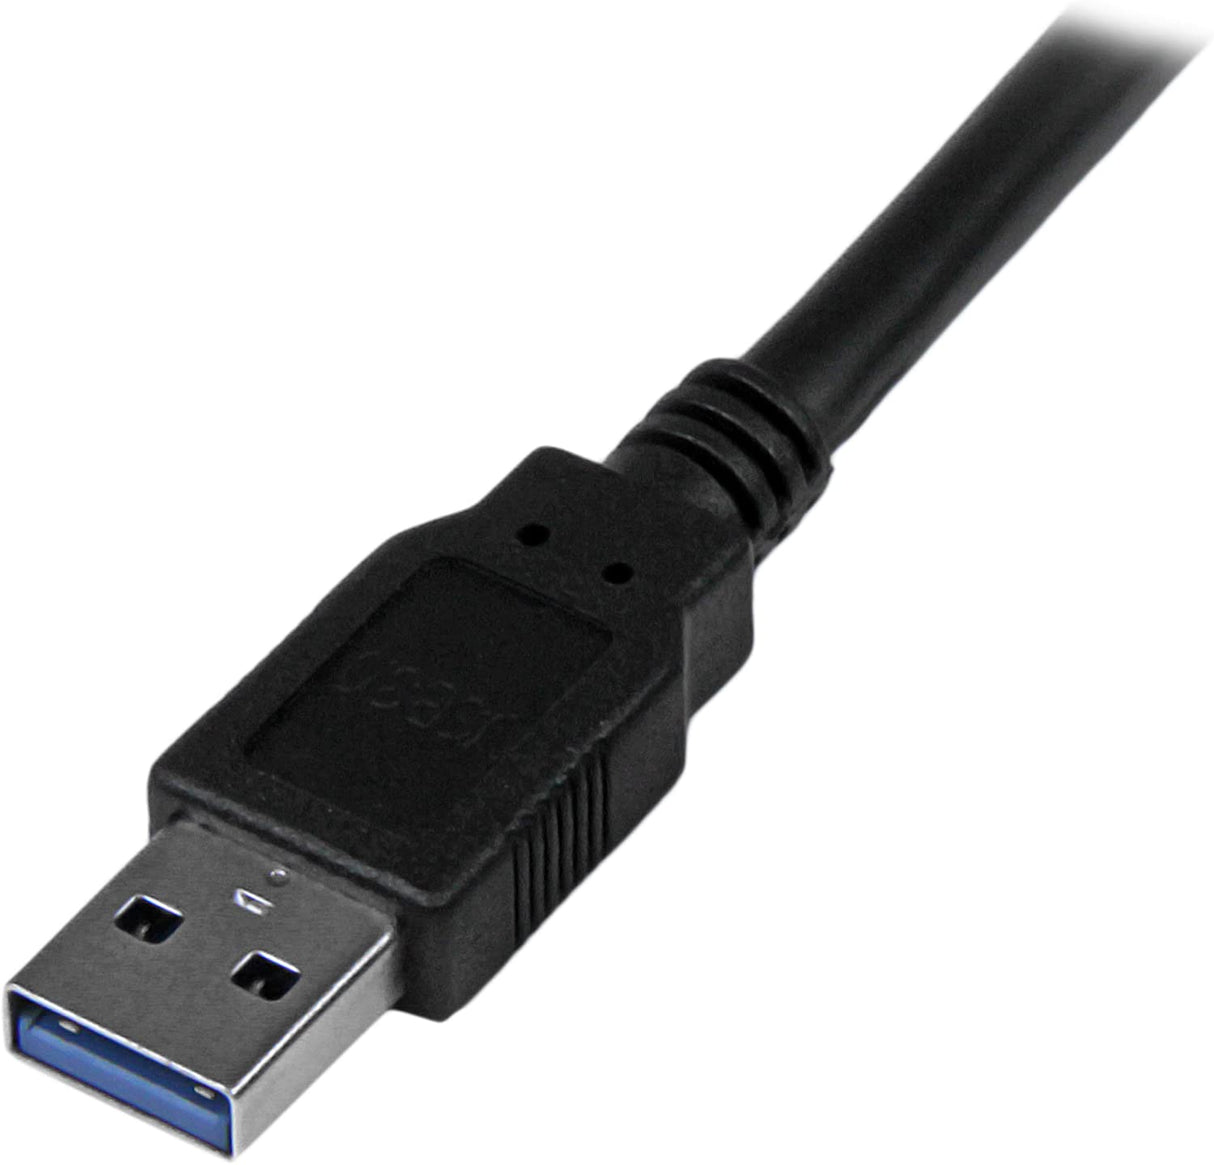 StarTech.com 3m 10 ft USB 3.0 Cable - A to A - M/M - Long USB 3.0 Cable - USB 3.1 Gen 1 (5 Gbps) (USB3SAA3MBK) 10 ft / 3m Black